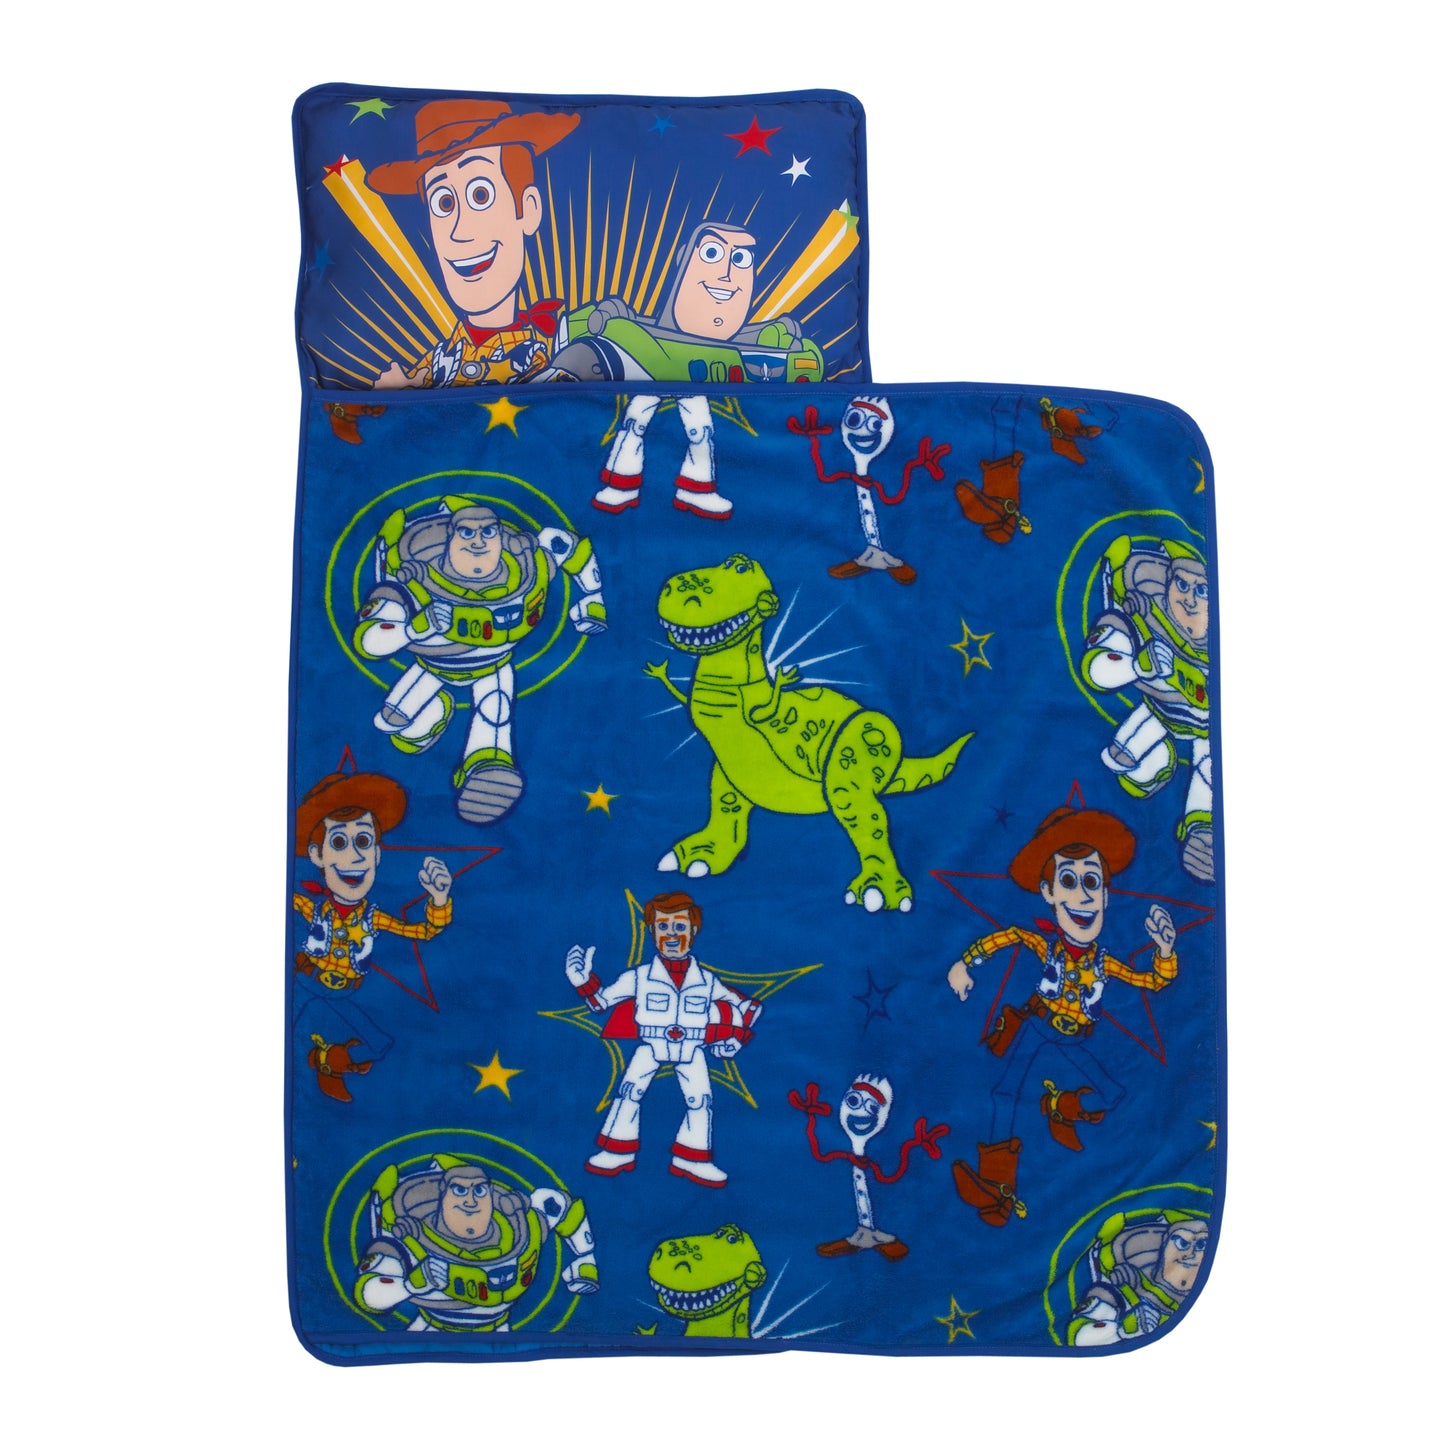 Disney Toy Story Blue and Green Toddler Nap Mat